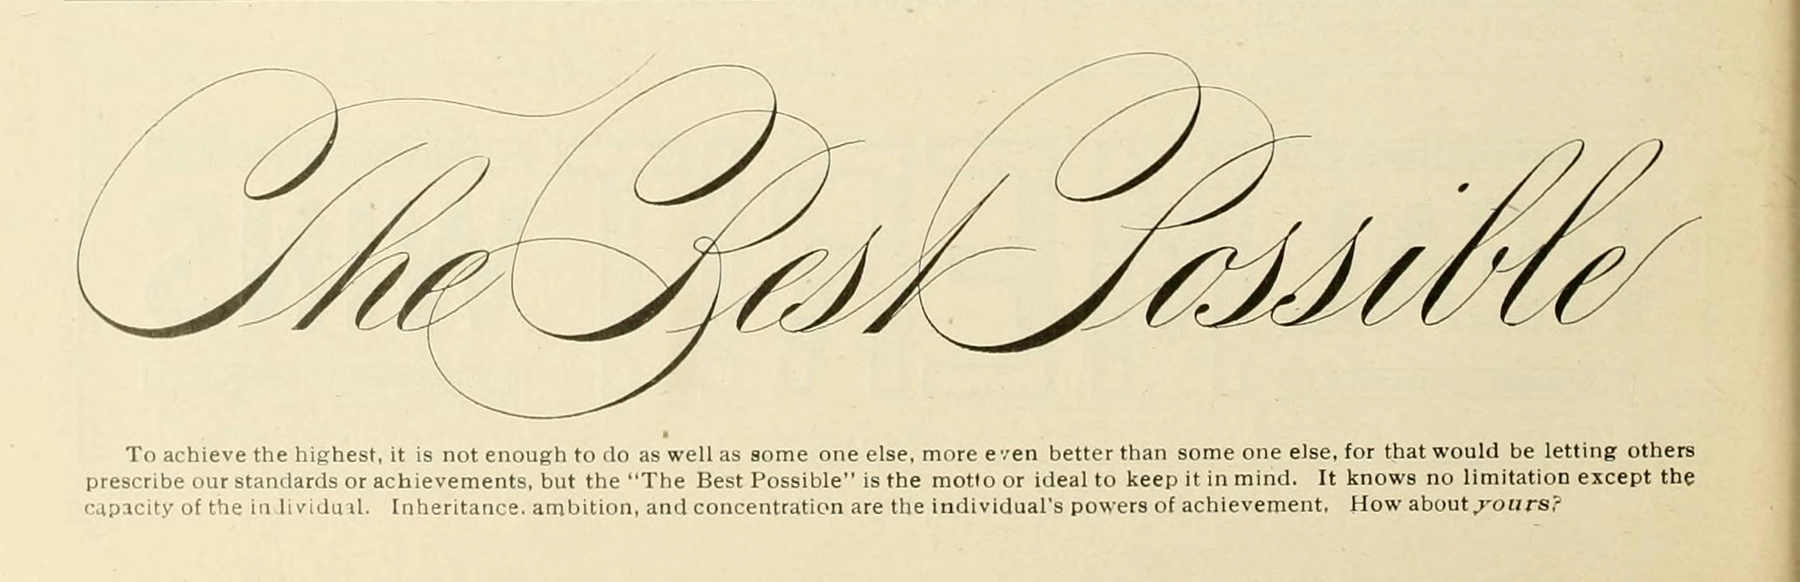 "The Best Possible" Penmanship Sample from The Business Educator, 1915.